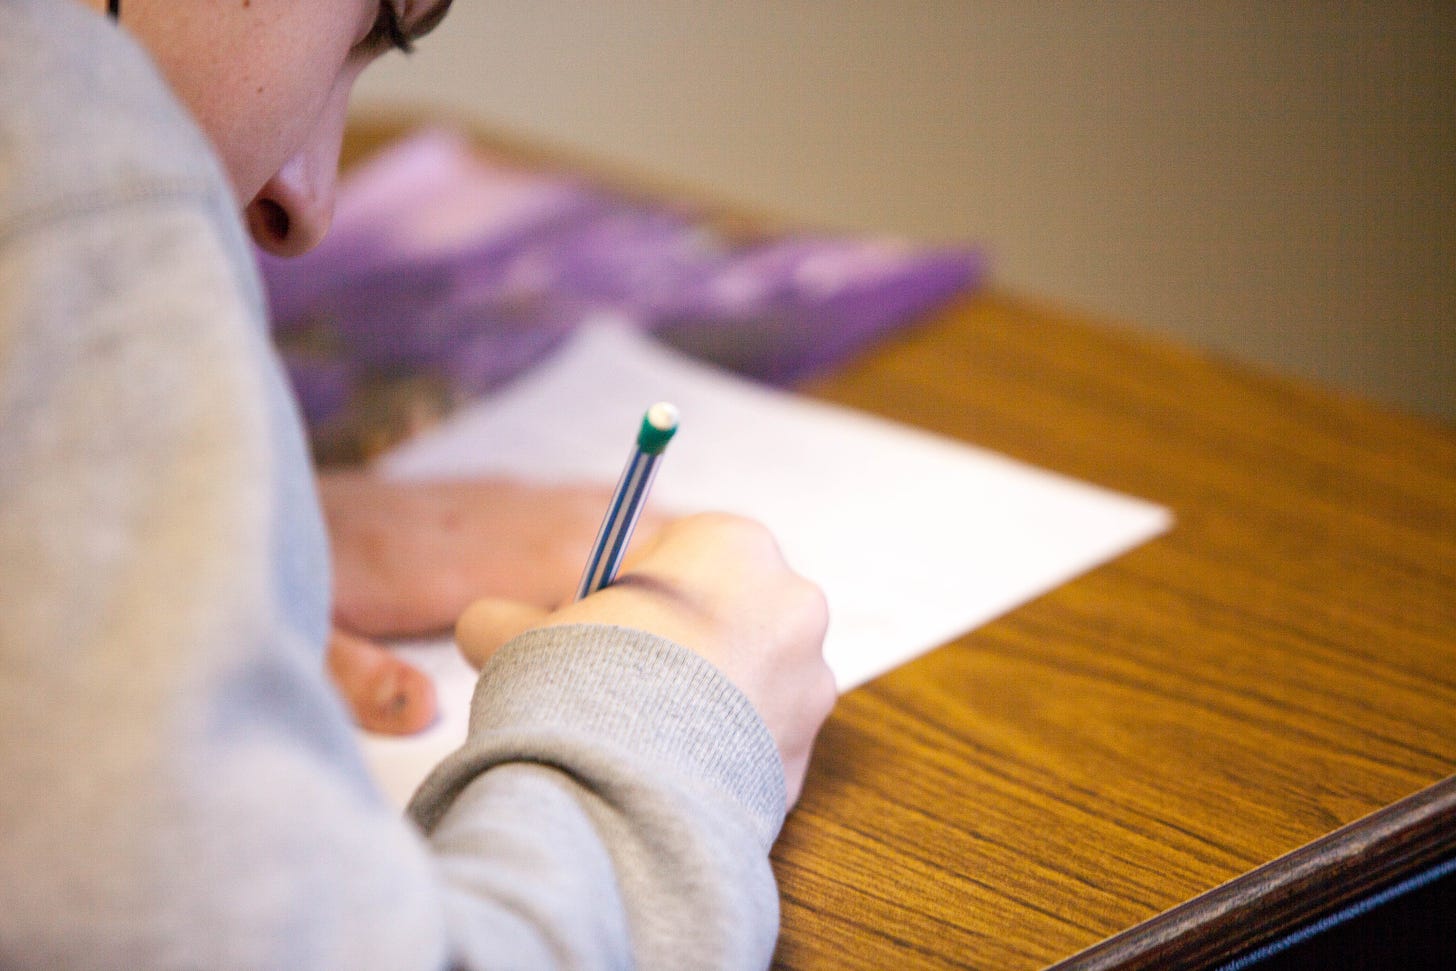 Close up photo of a person leaning over a desk writing with a pencil on a piece of paper